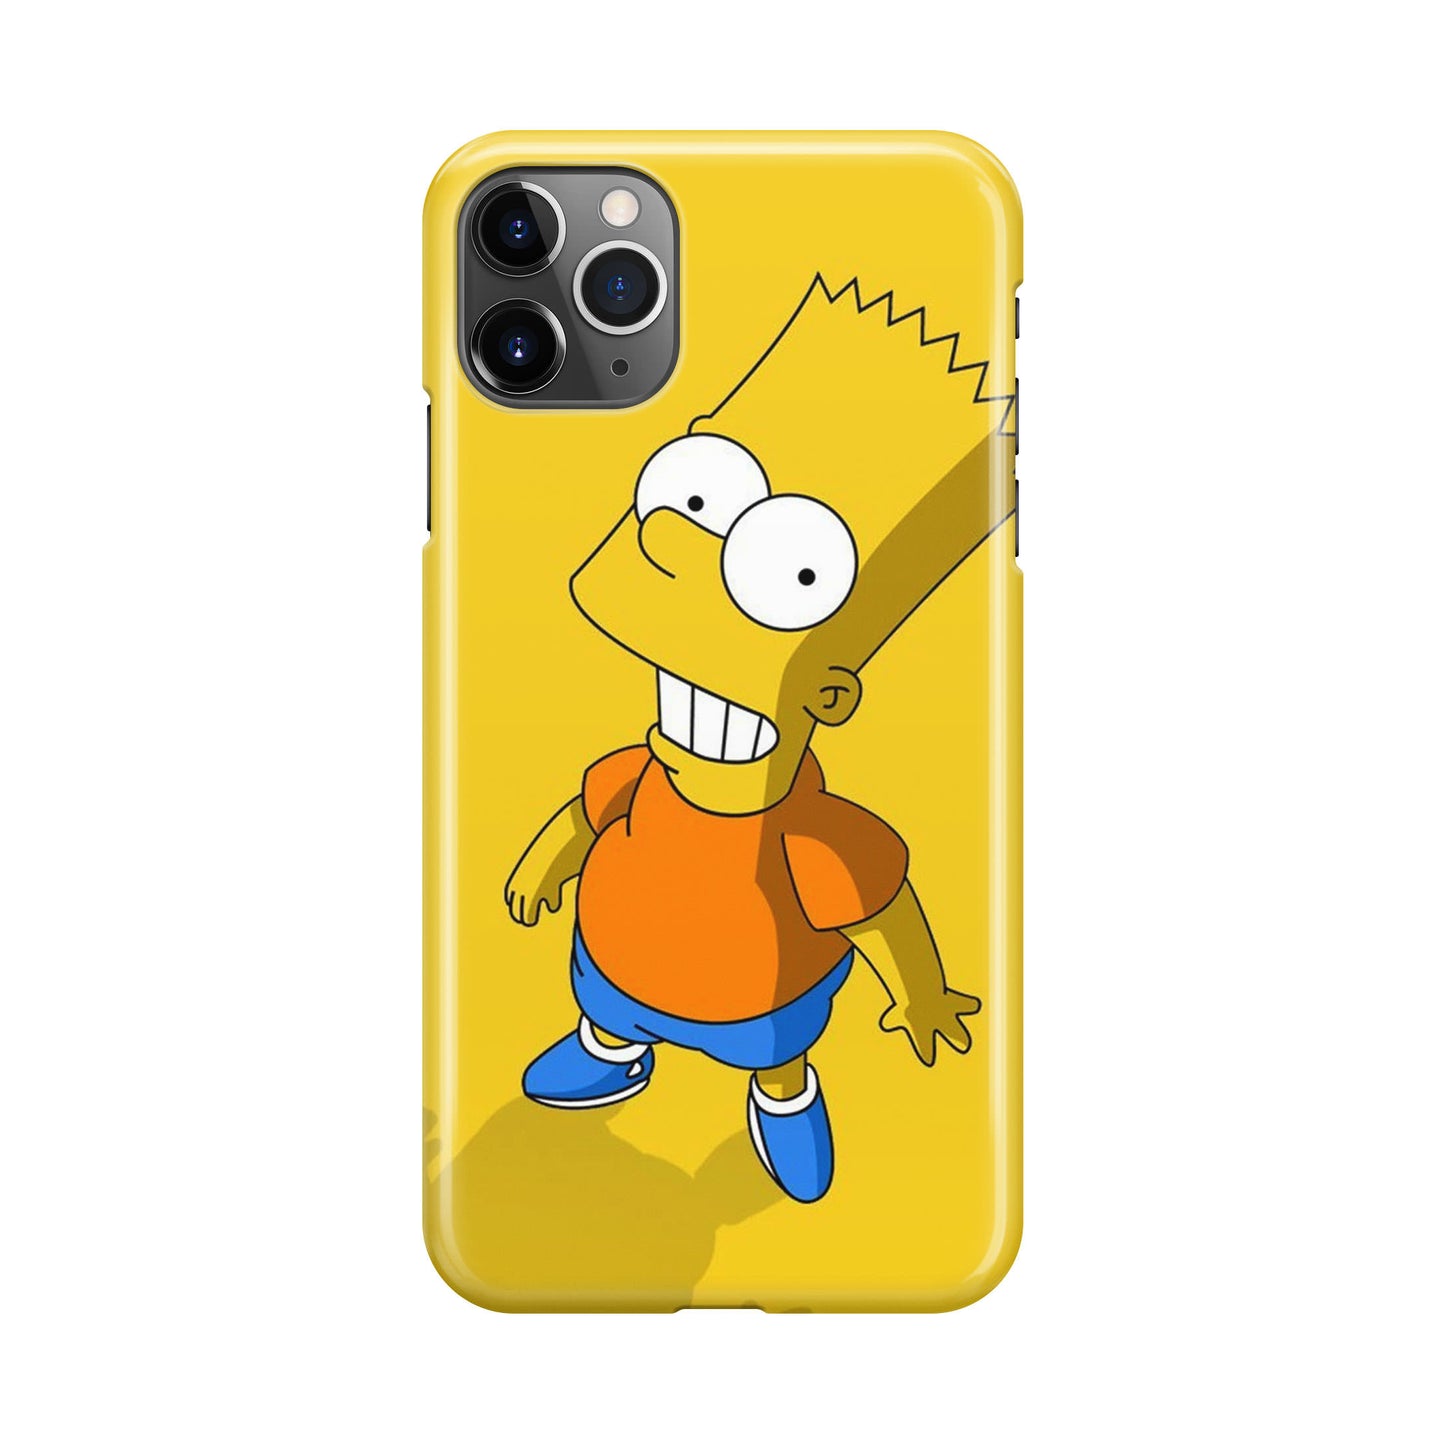 Bart The Oldest Child iPhone 11 Pro Max Case